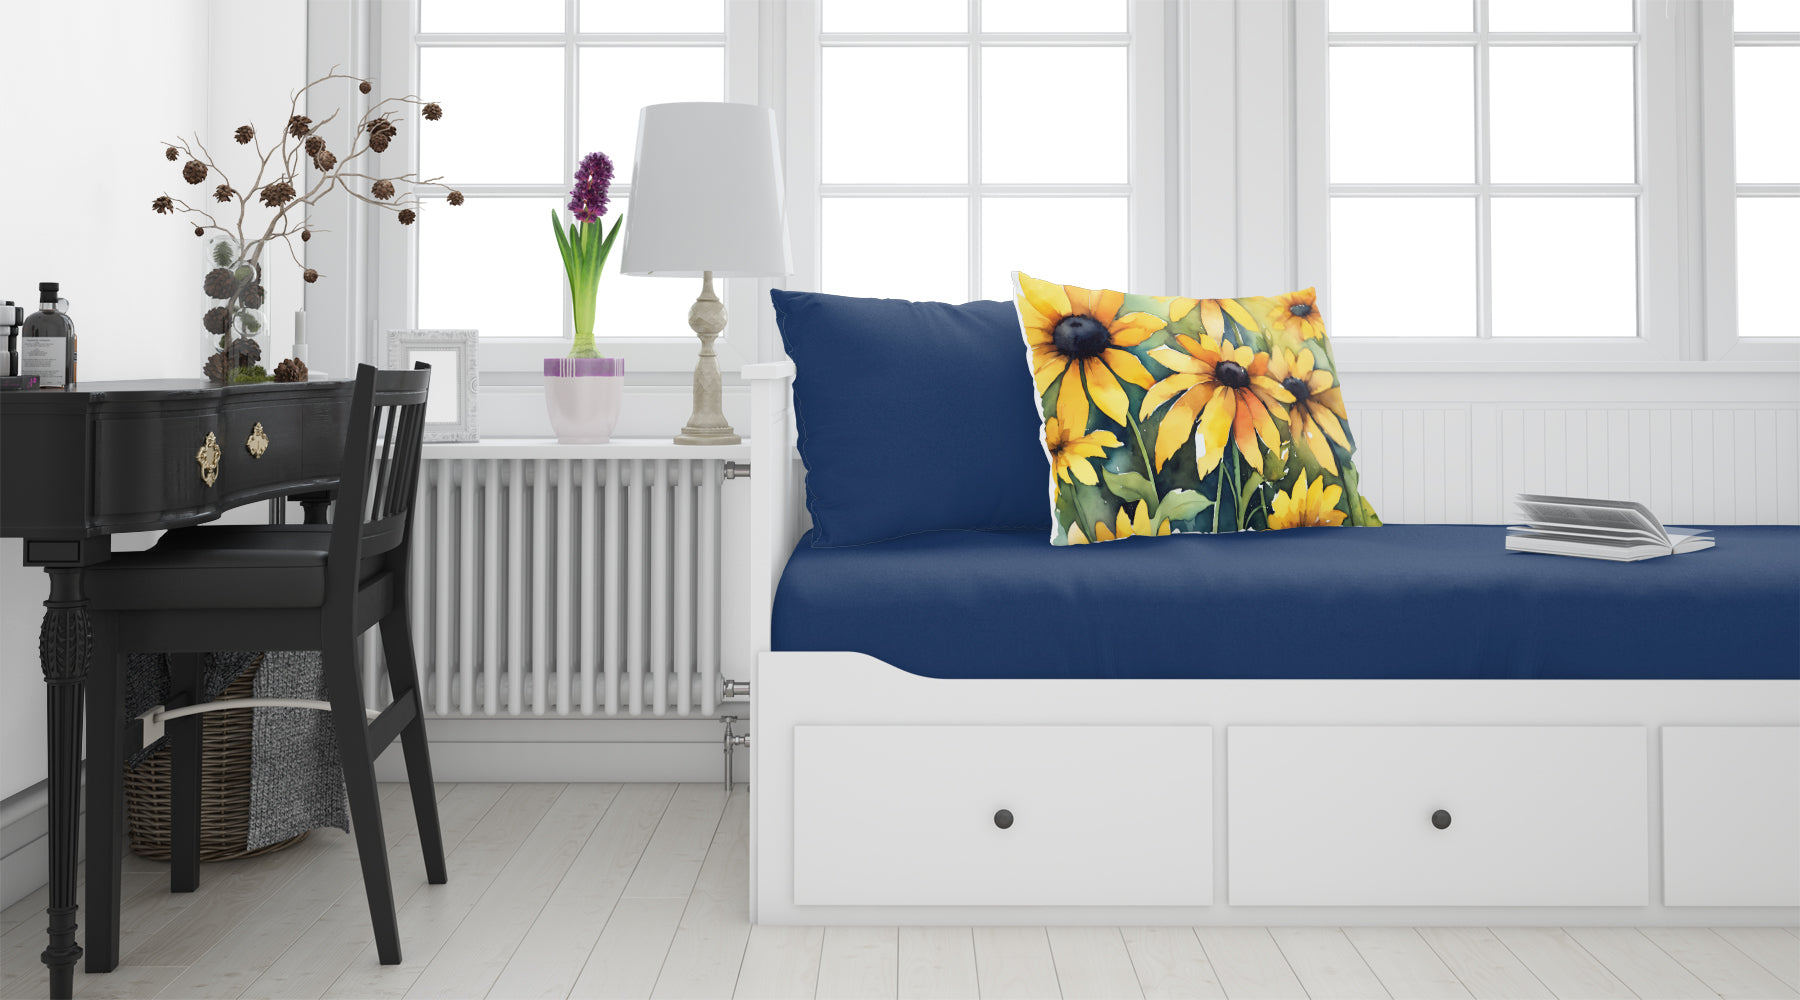 Maryland Black-Eyed Susans in Watercolor Fabric Standard Pillowcase